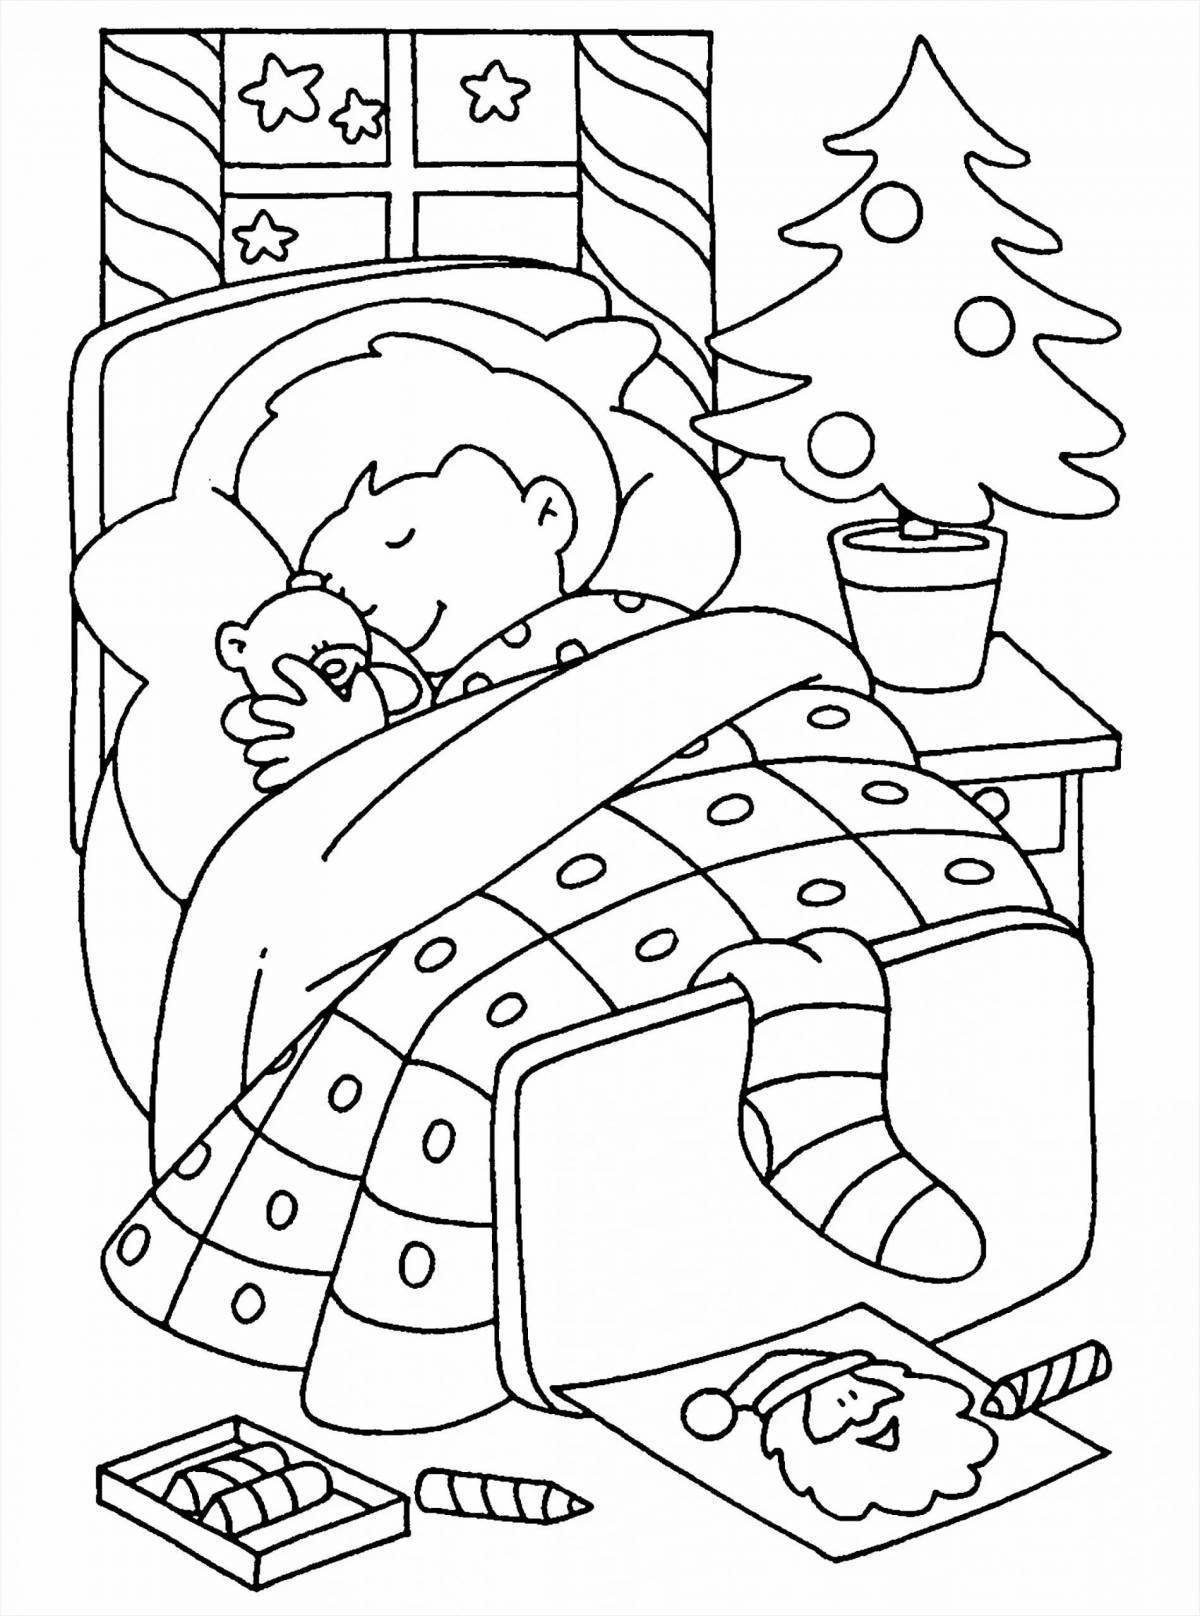 Living Christmas story coloring book